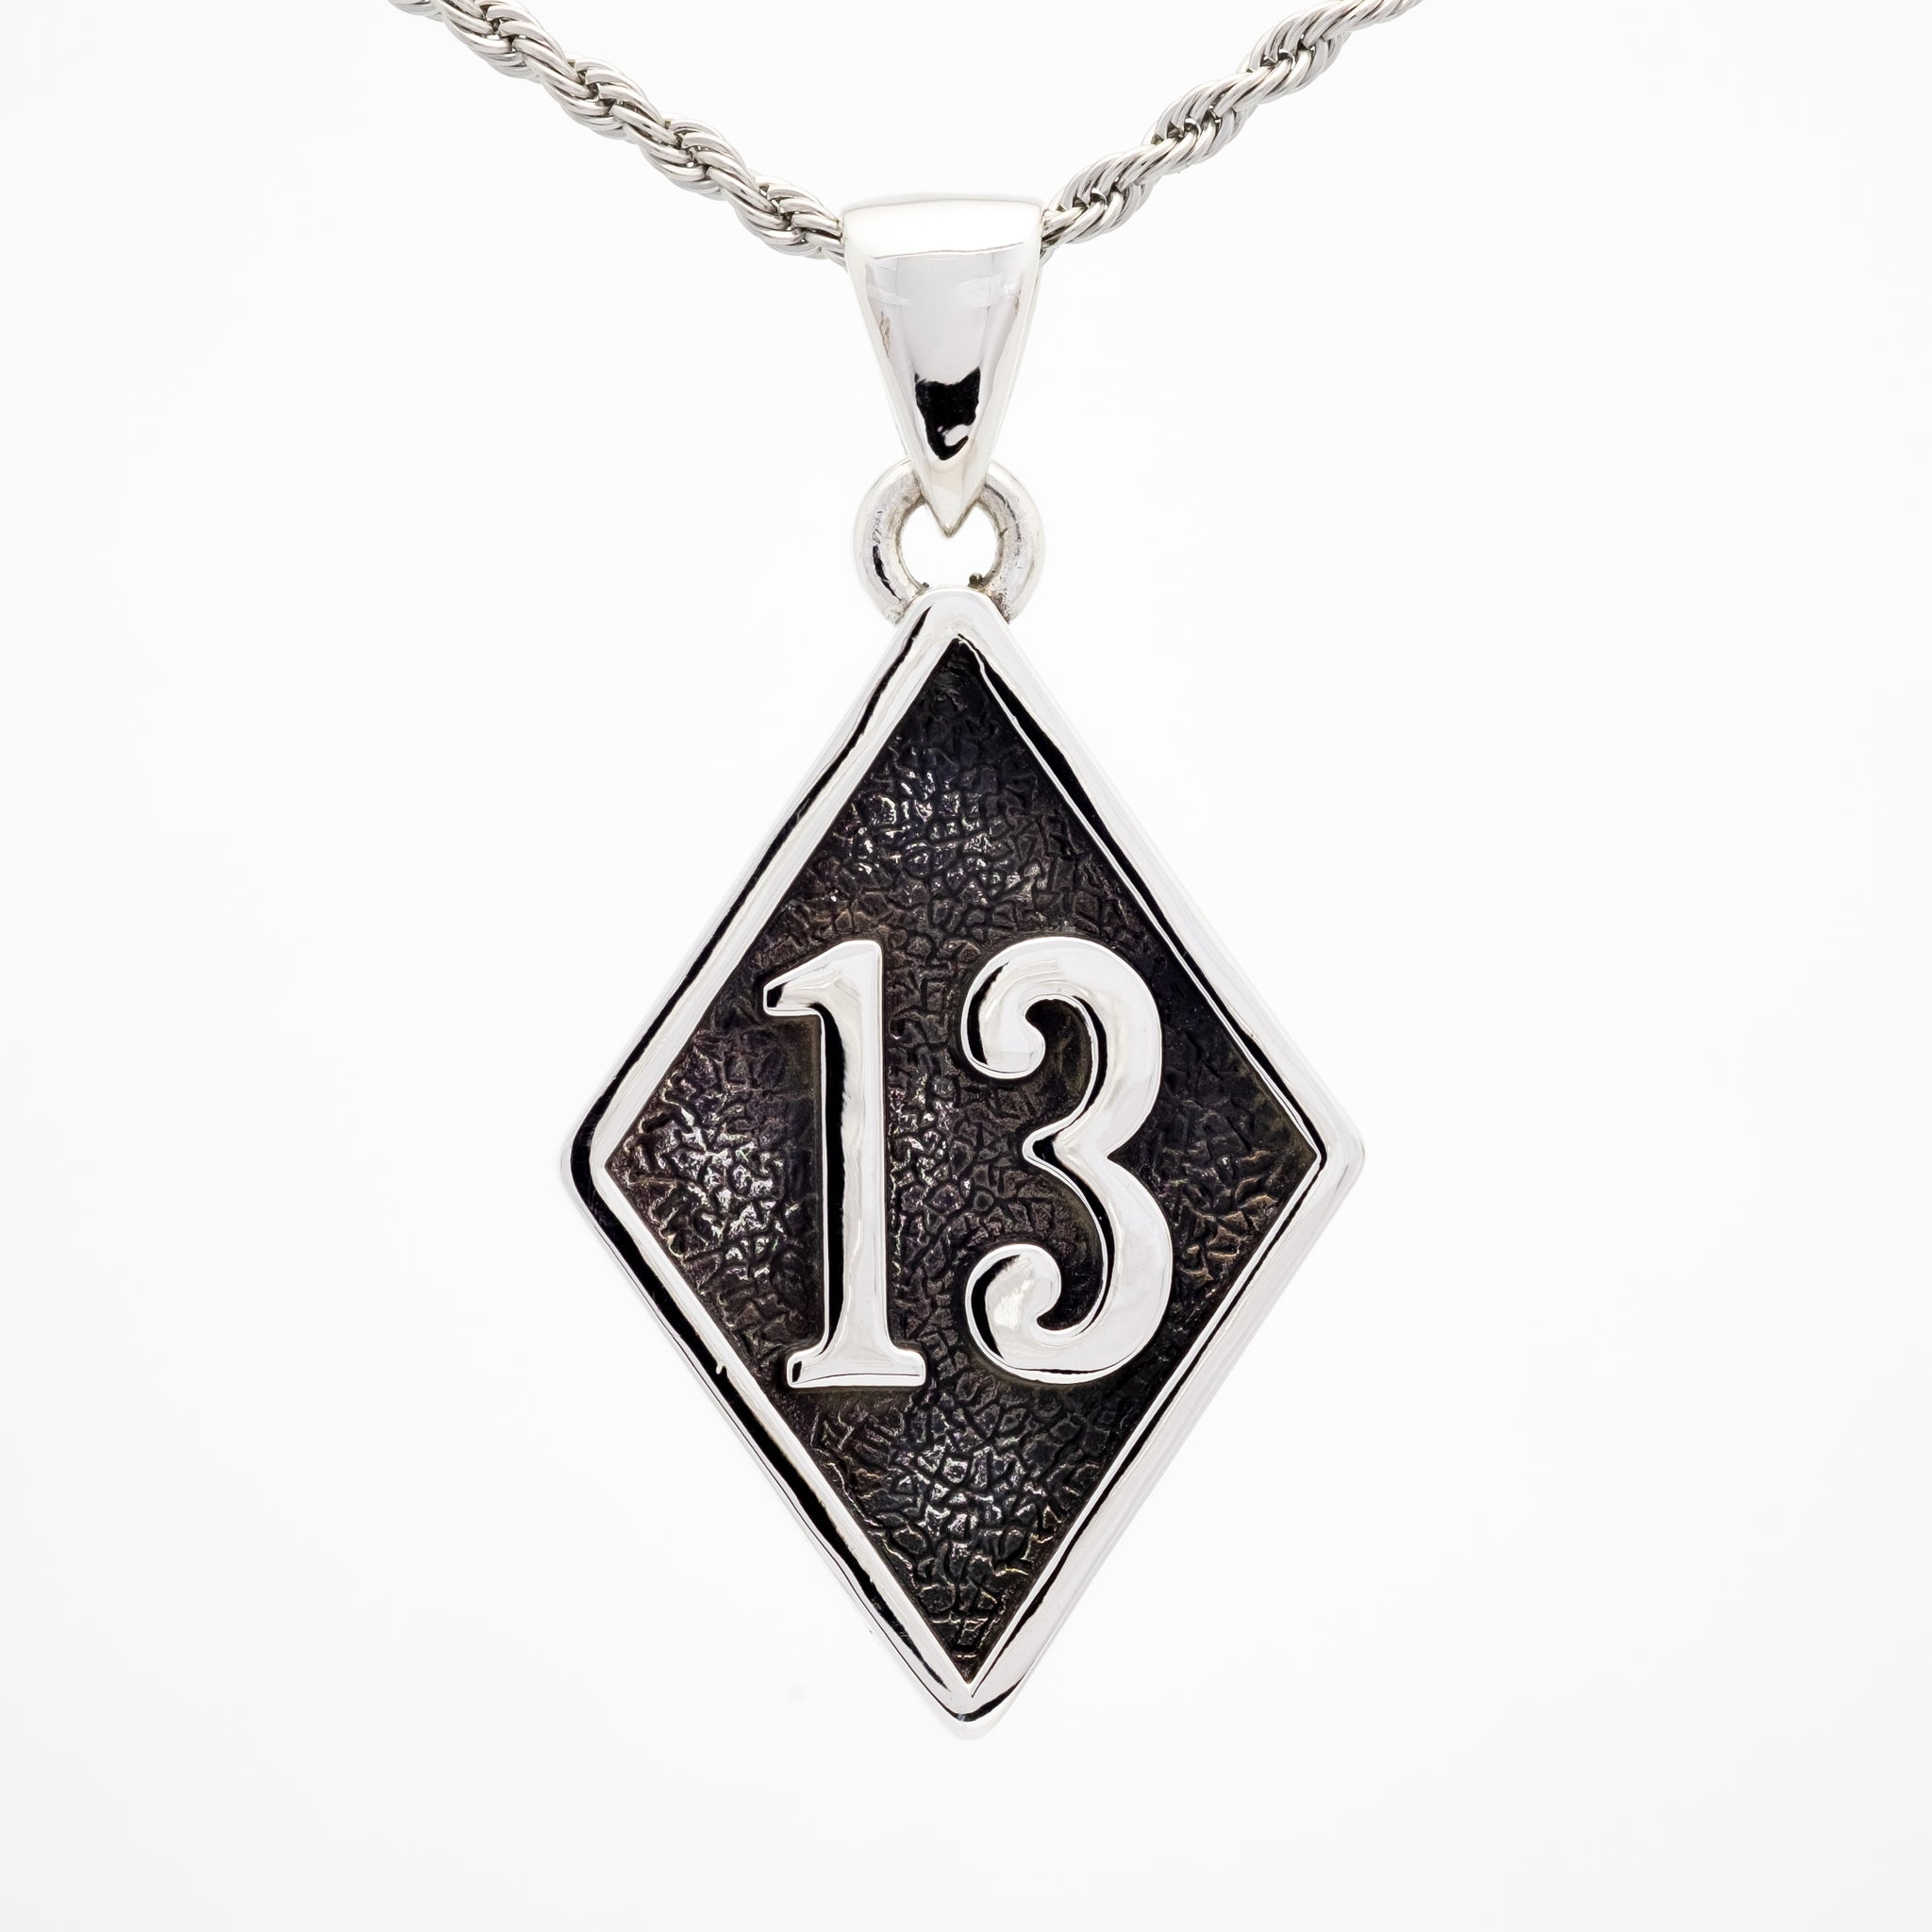 Number 13 Charm, Charms for Bracelets and Necklaces